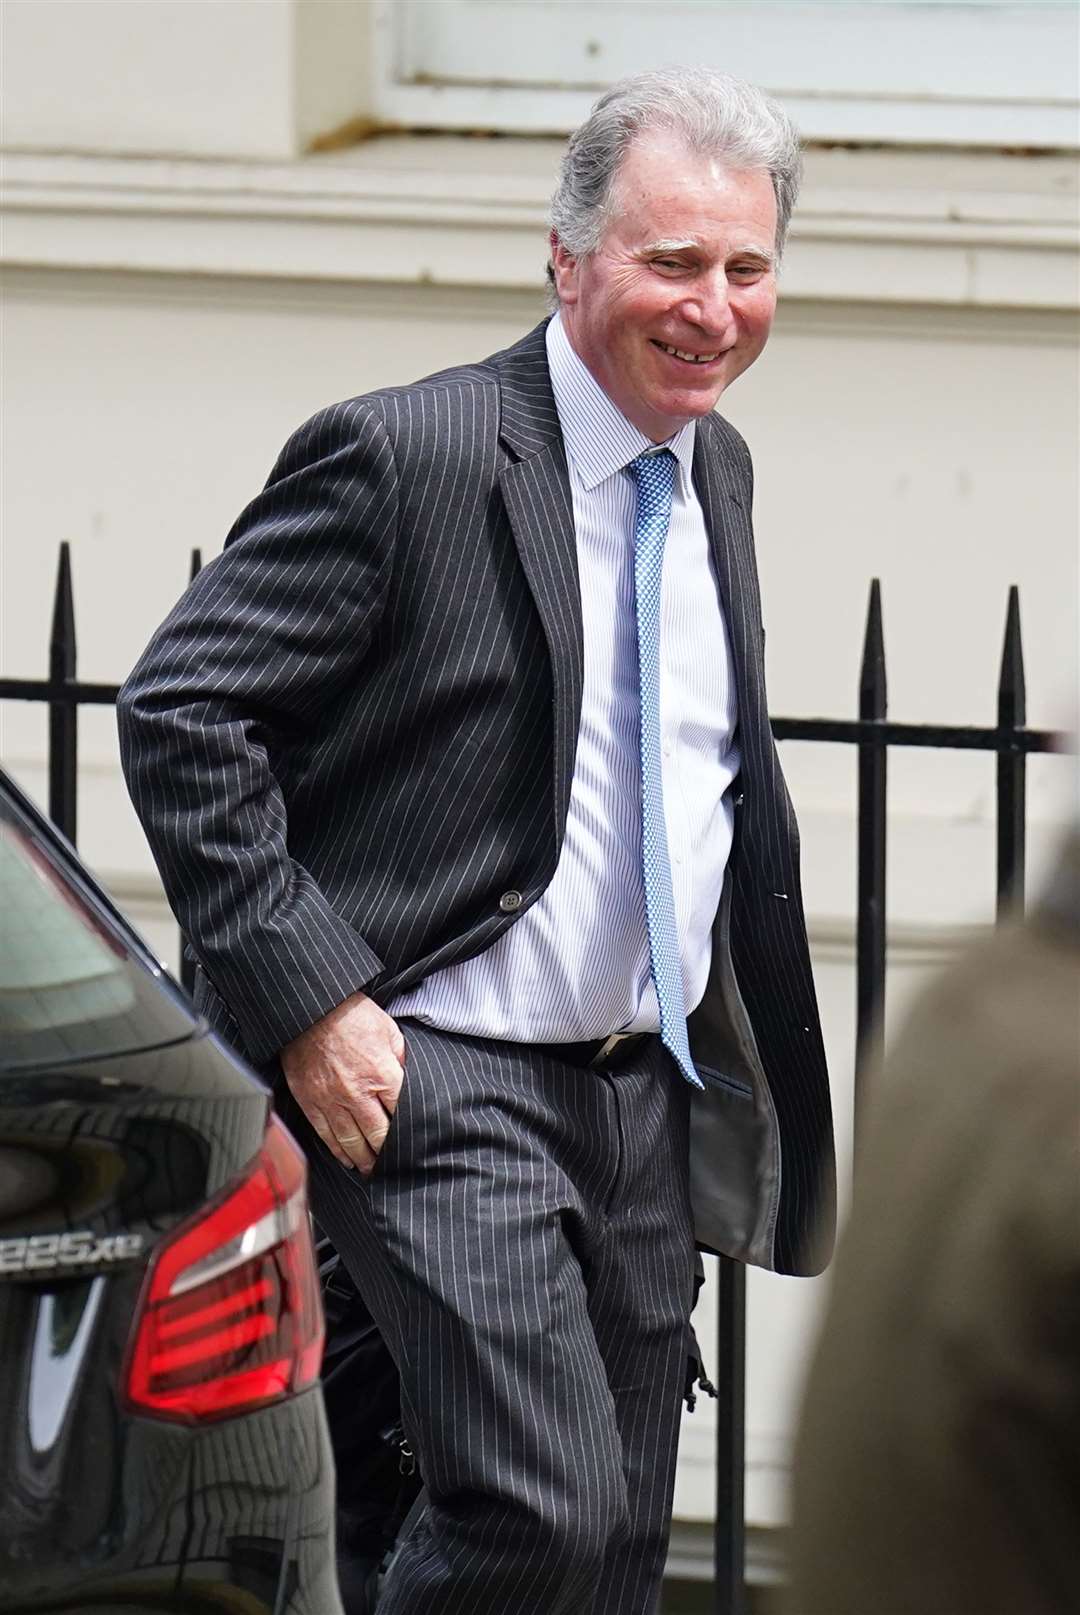 Sir Oliver Letwin told the inquiry it is a ‘lasting regret’ that he did not focus more on pandemics while in the Cabinet Office (James Manning/PA)